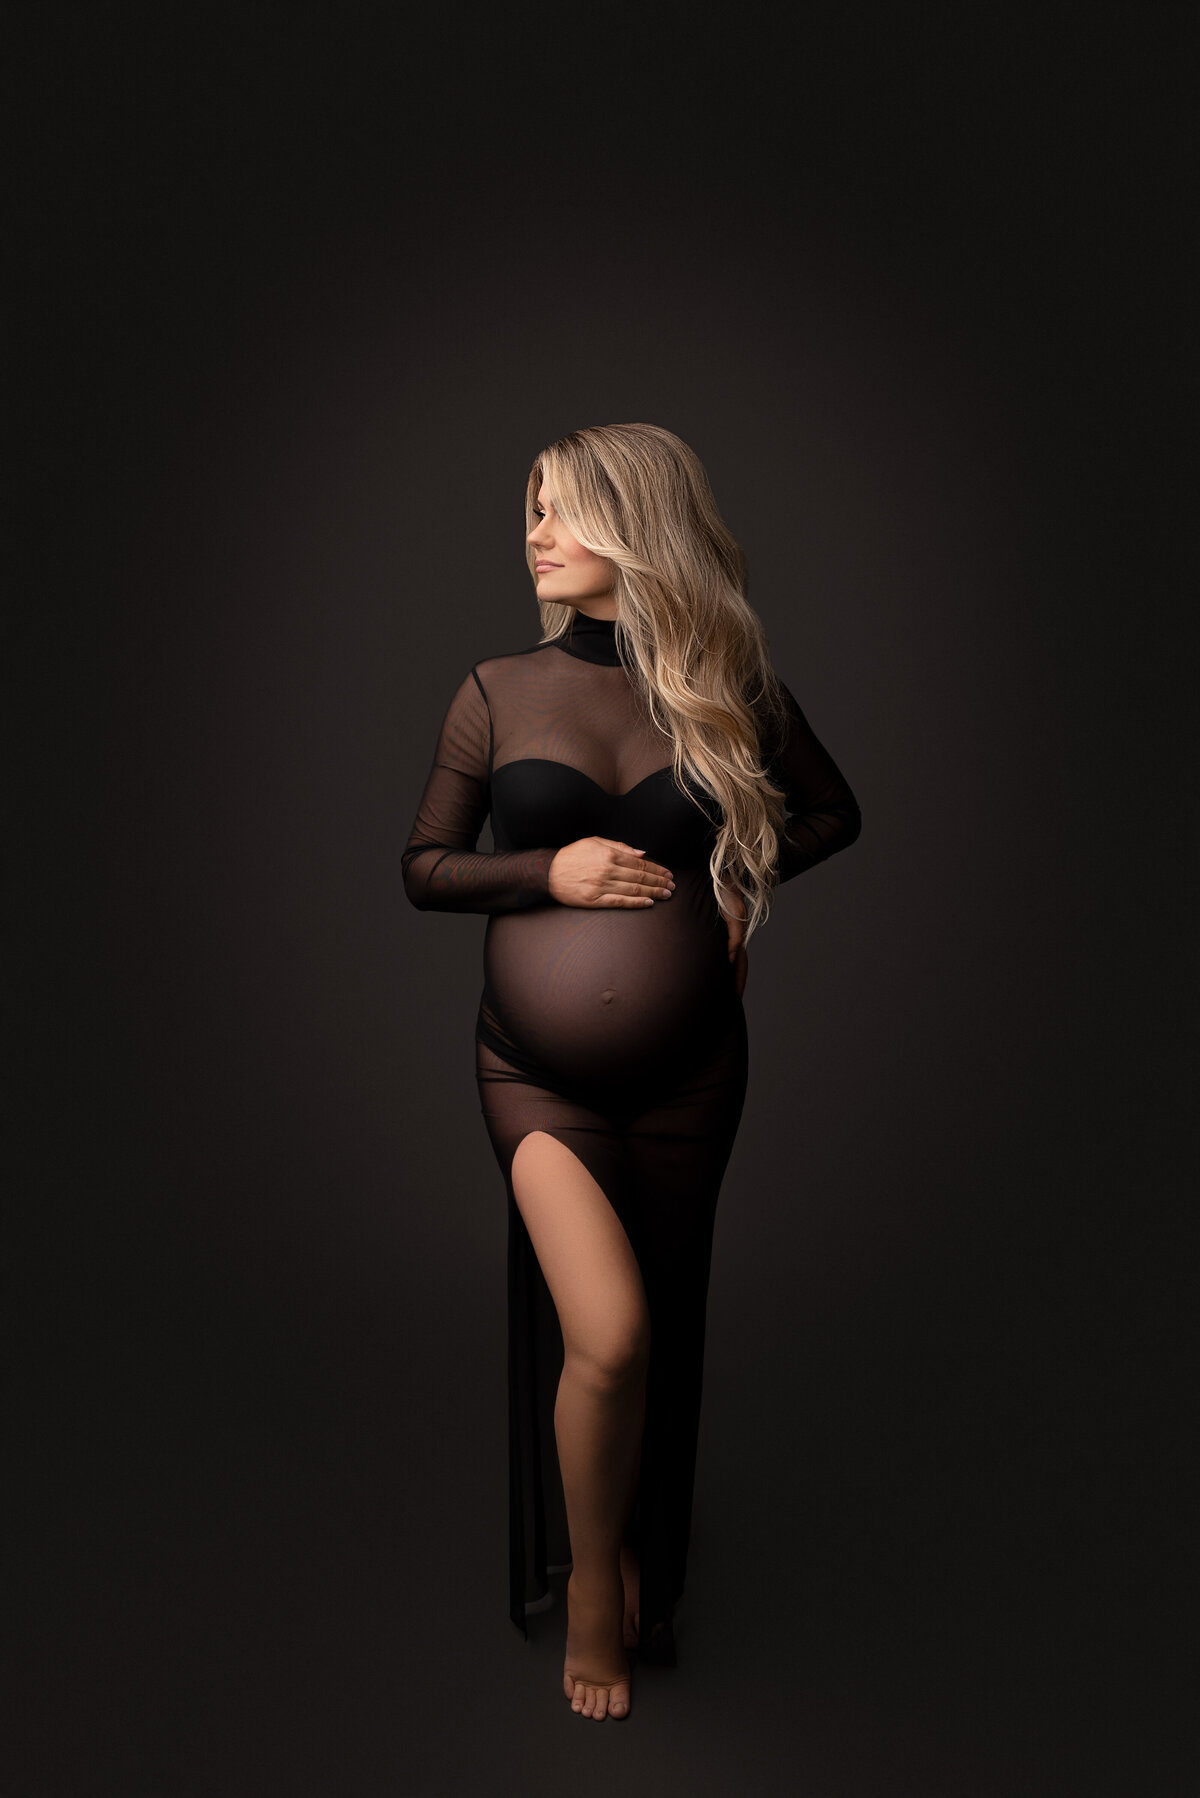 New Jersey's best maternity photographer Katie Marshall captures expectant mom for fine art maternity photos. Expectant mom in a sheer maternity photoshoot dress stands with her body facing the camera for a studio maternity portrait. Her knee is bent and peeks out from the slit in the dress. She is looking over her shoulder toward the light source.